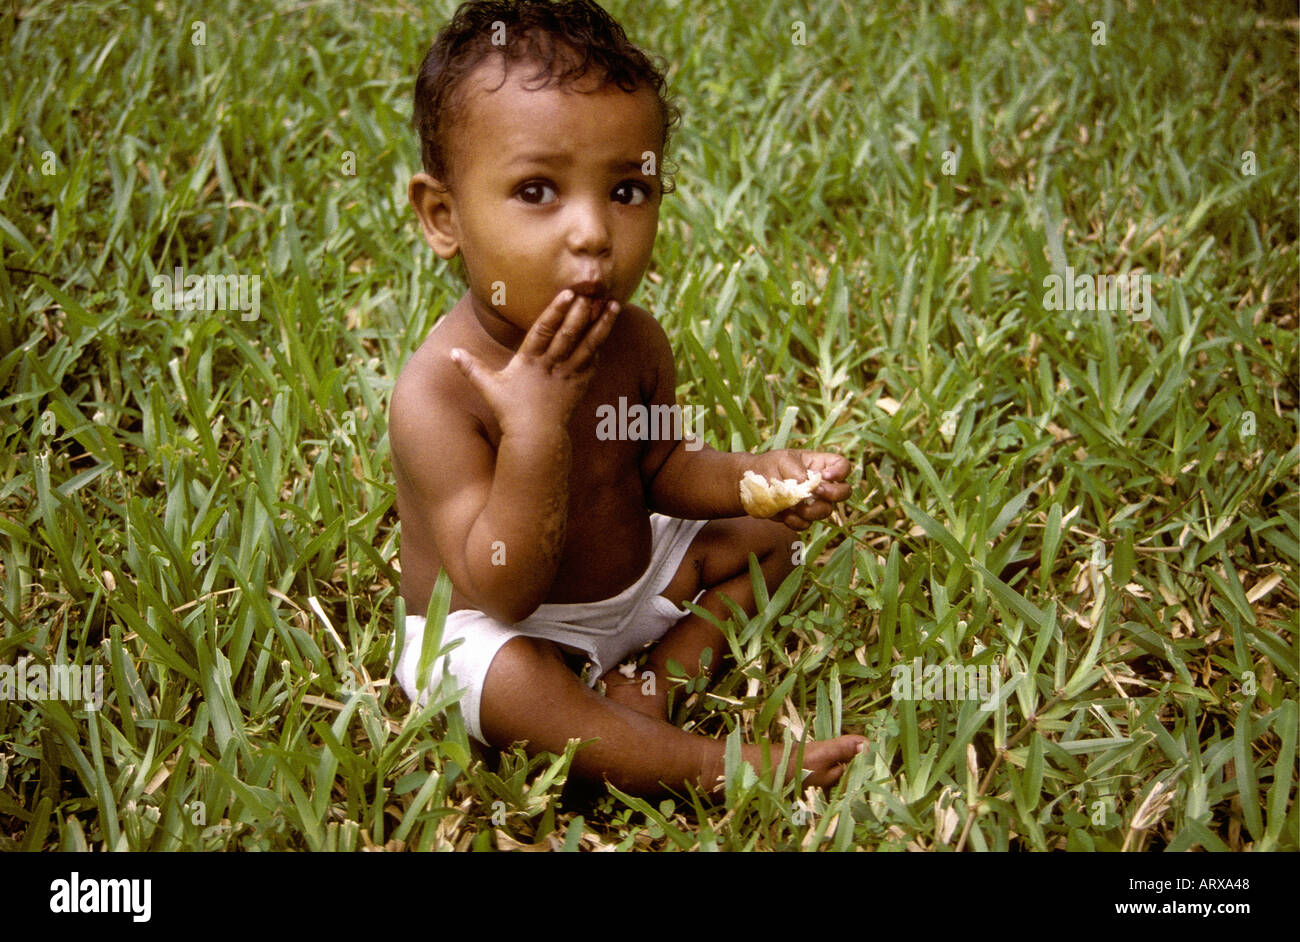 Small boy about one year old eating a piece of bread Zanzibar Tanzania East Africa Stock Photo